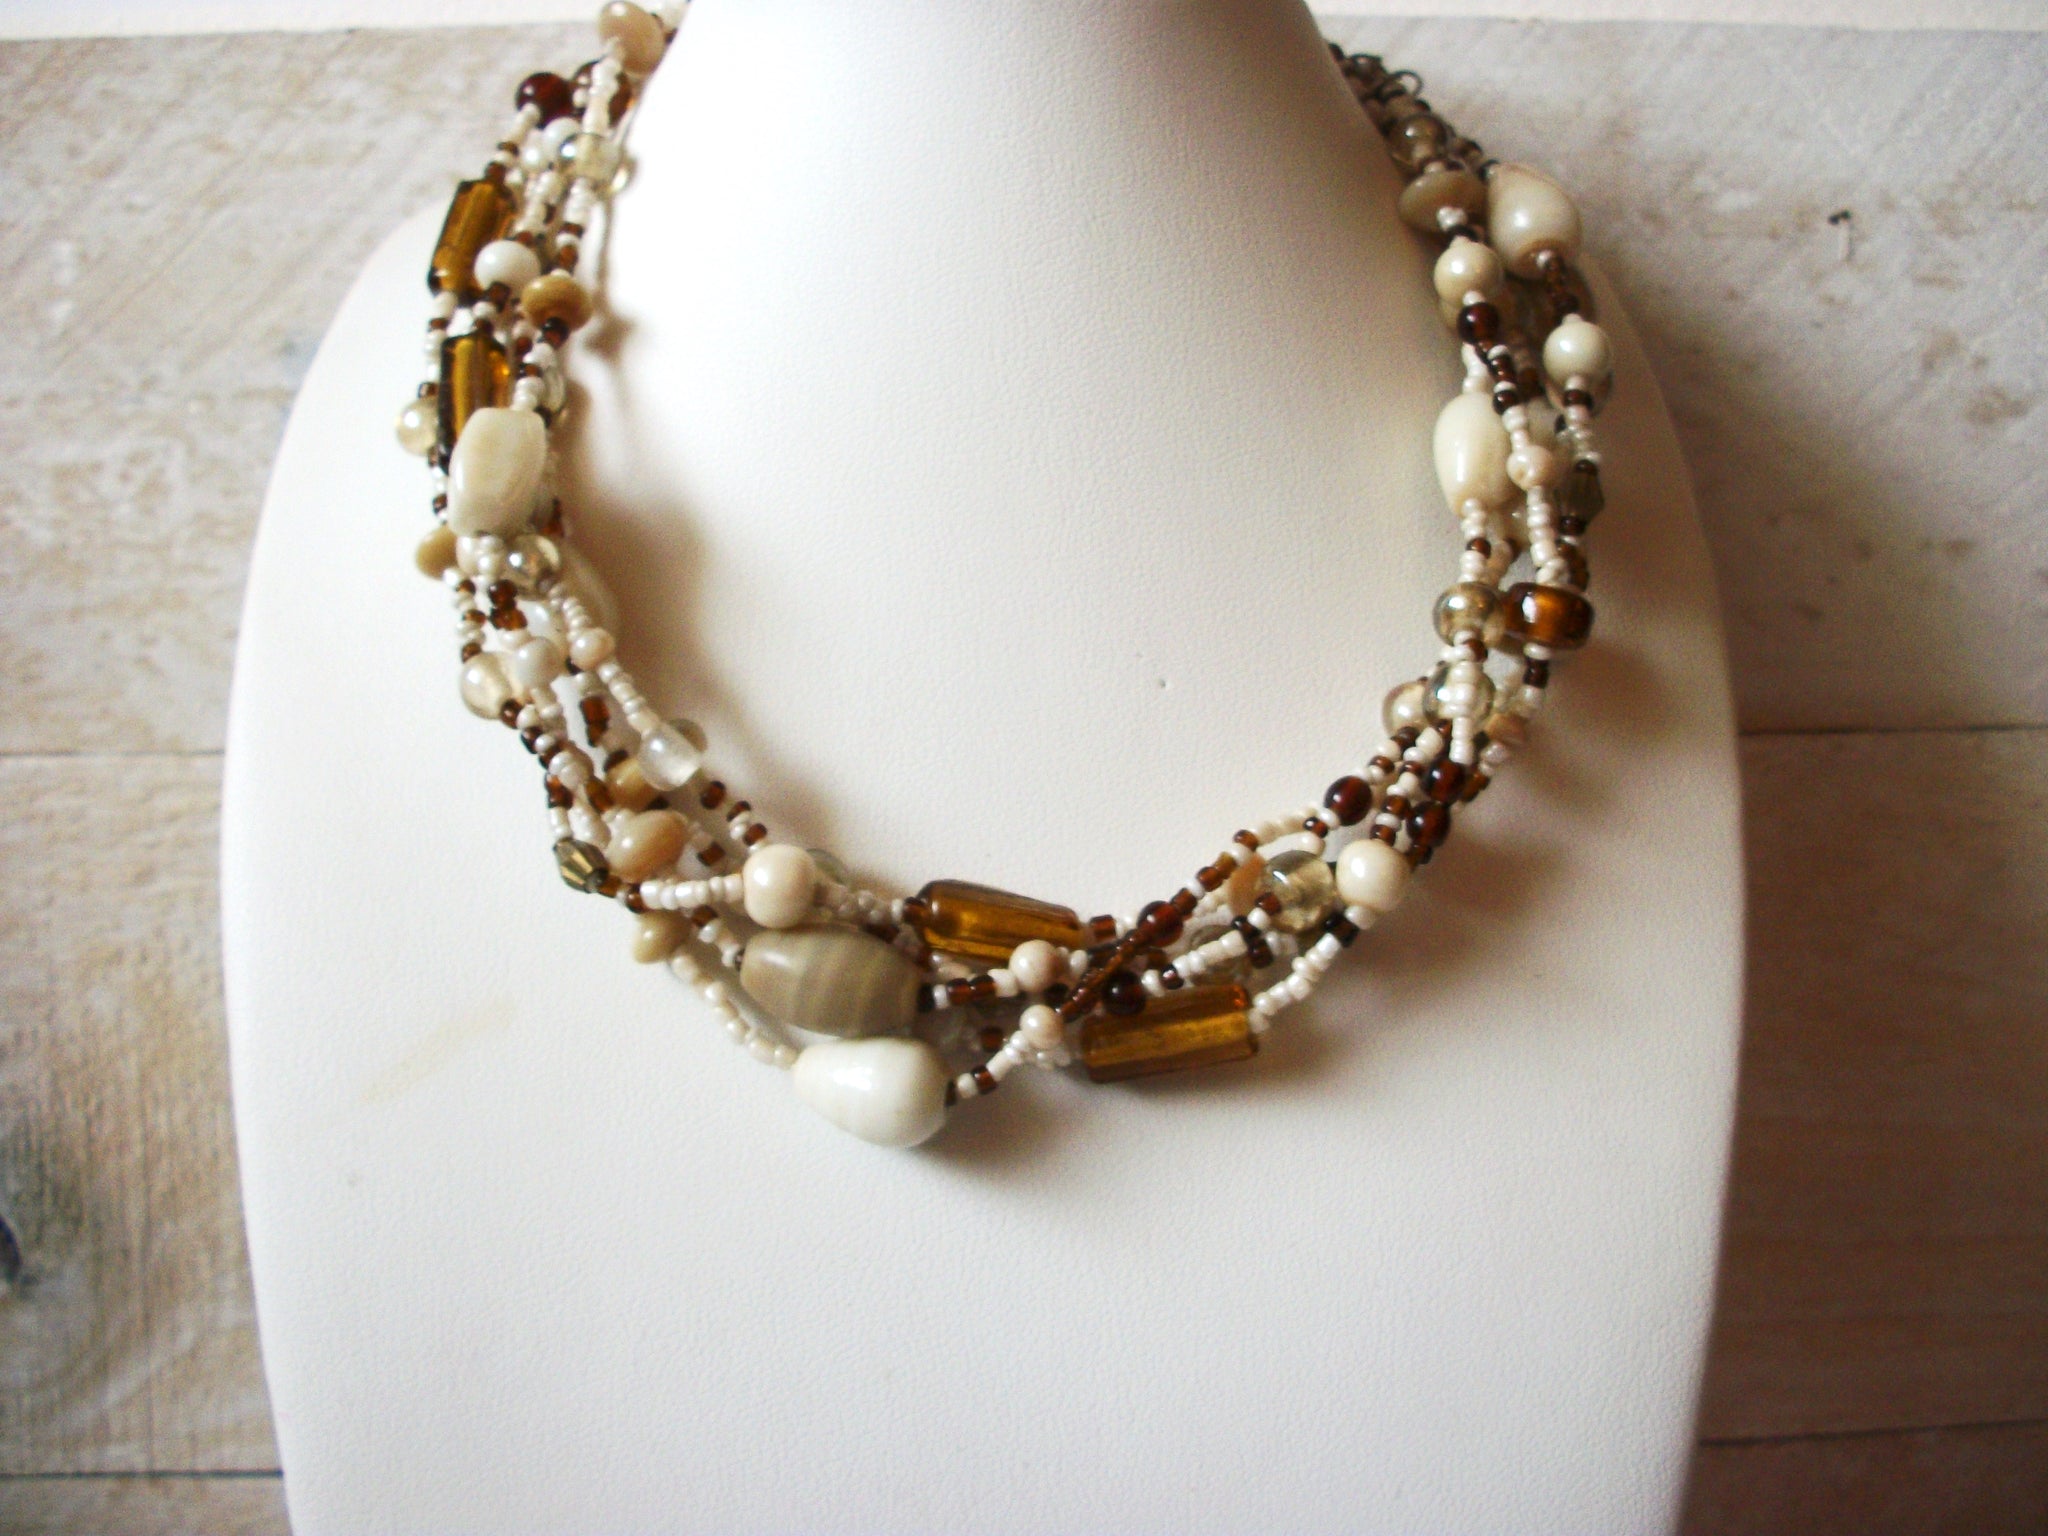 Vintage Glass Beads Necklace 52720